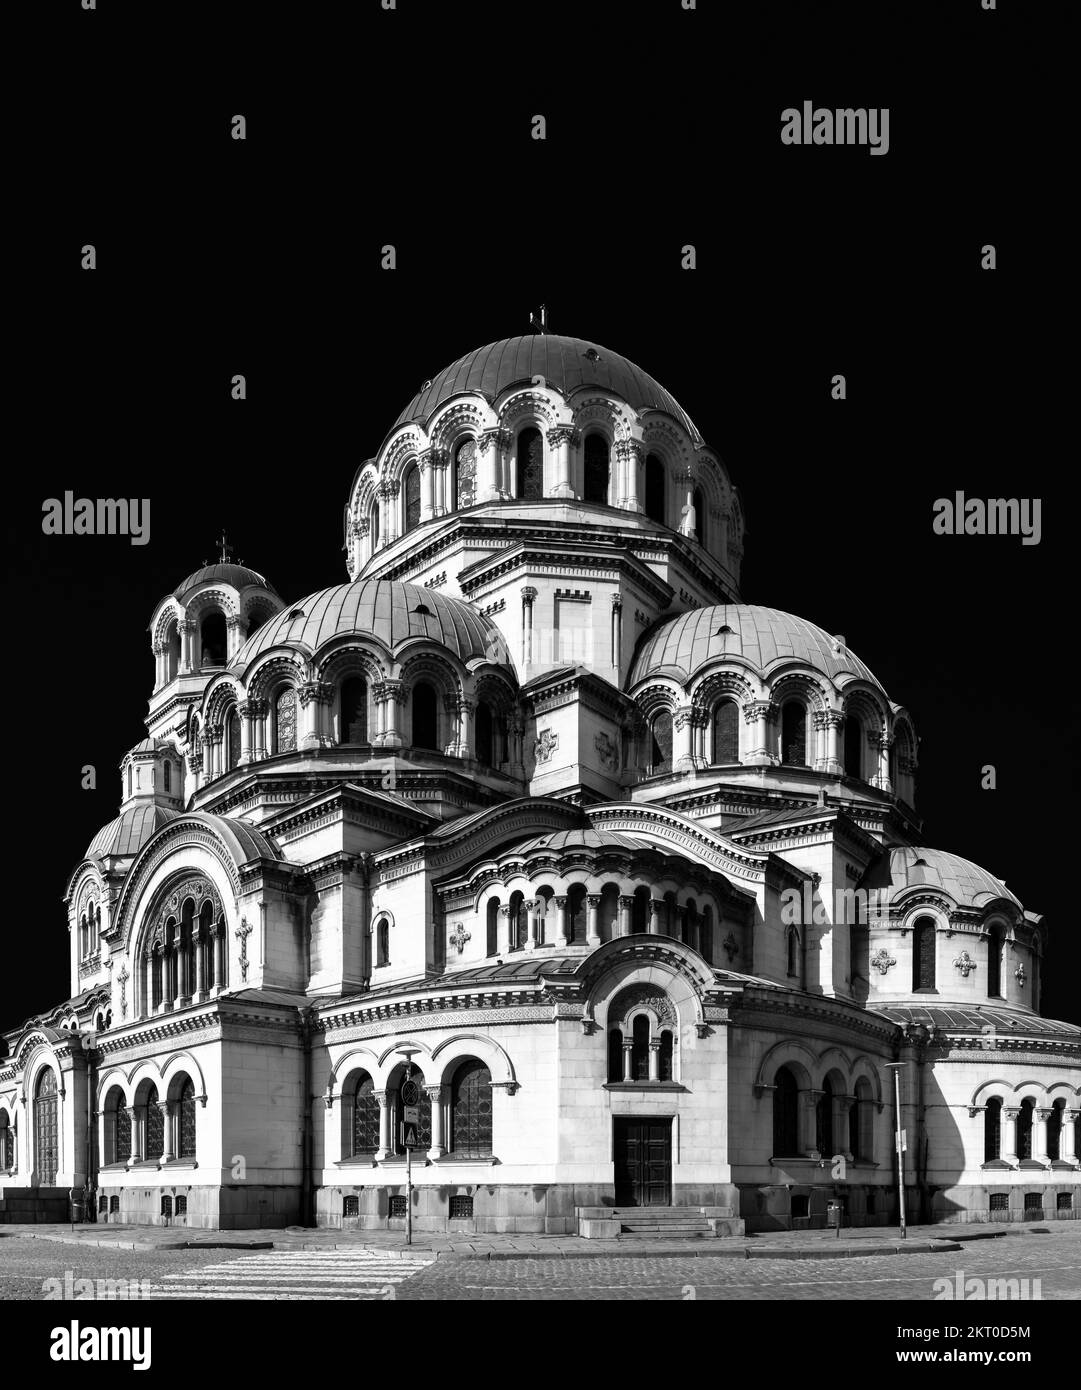 Sofia, Bulgaria - 30 October, 2022: black-and-white view of the Saint Alexander Nevsky Cathedral in downtwon Sofia Stock Photo